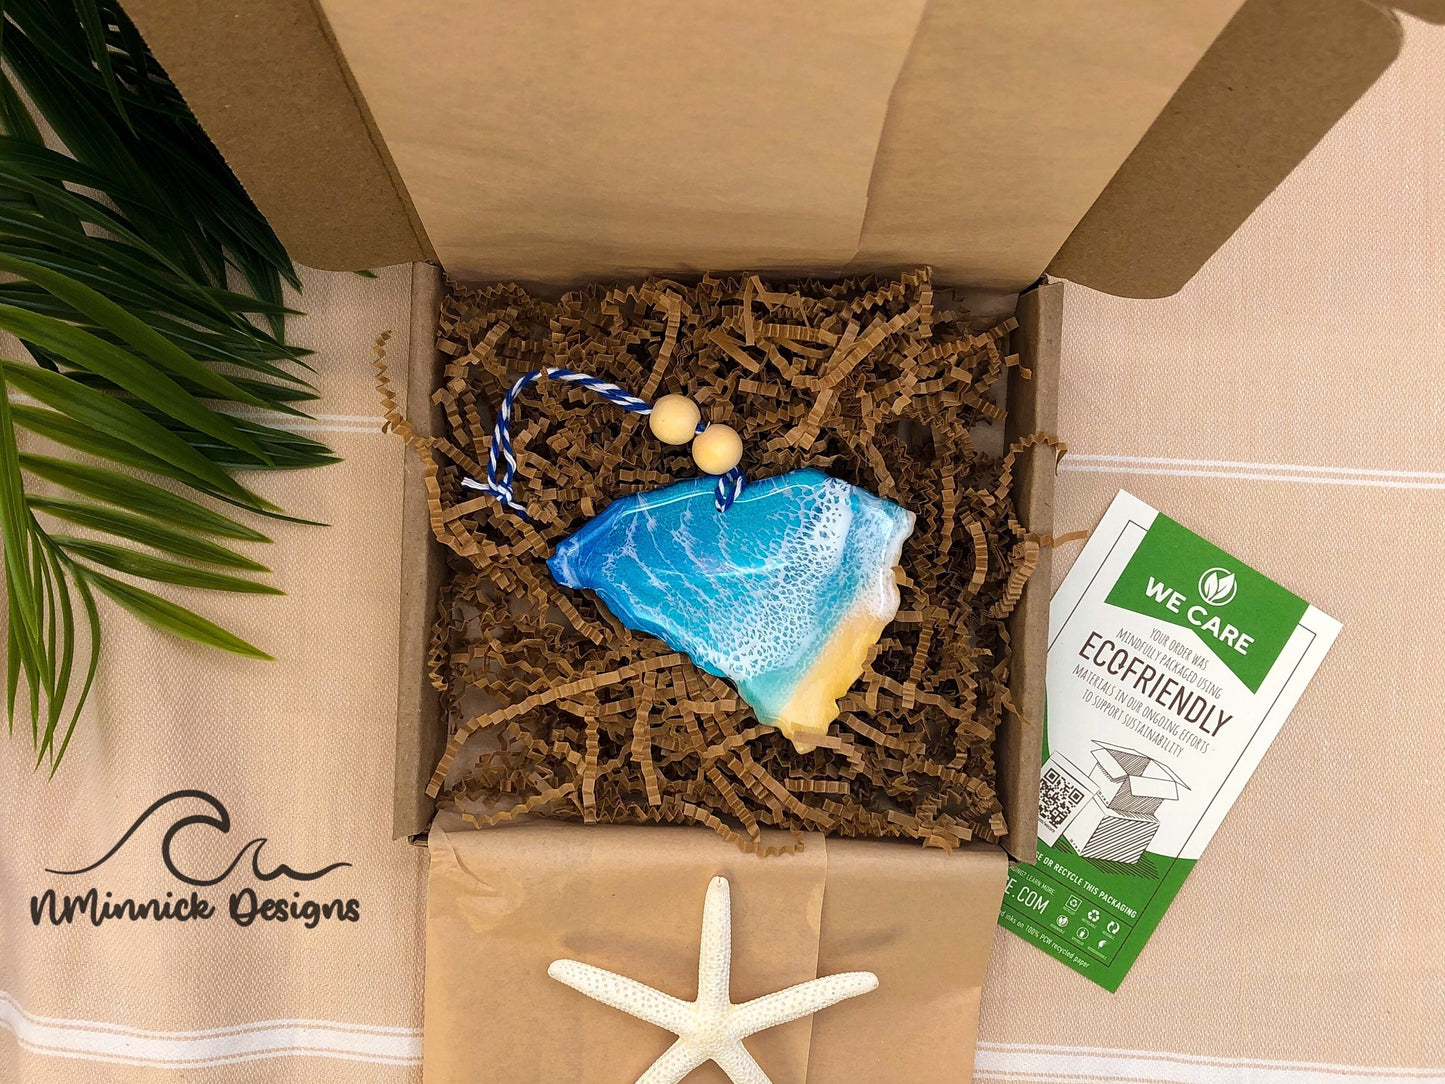 South Carolina Beach Resin ornament laying in an ecofriendly recyclable packing box with kraft colored tissue paper and paper shred